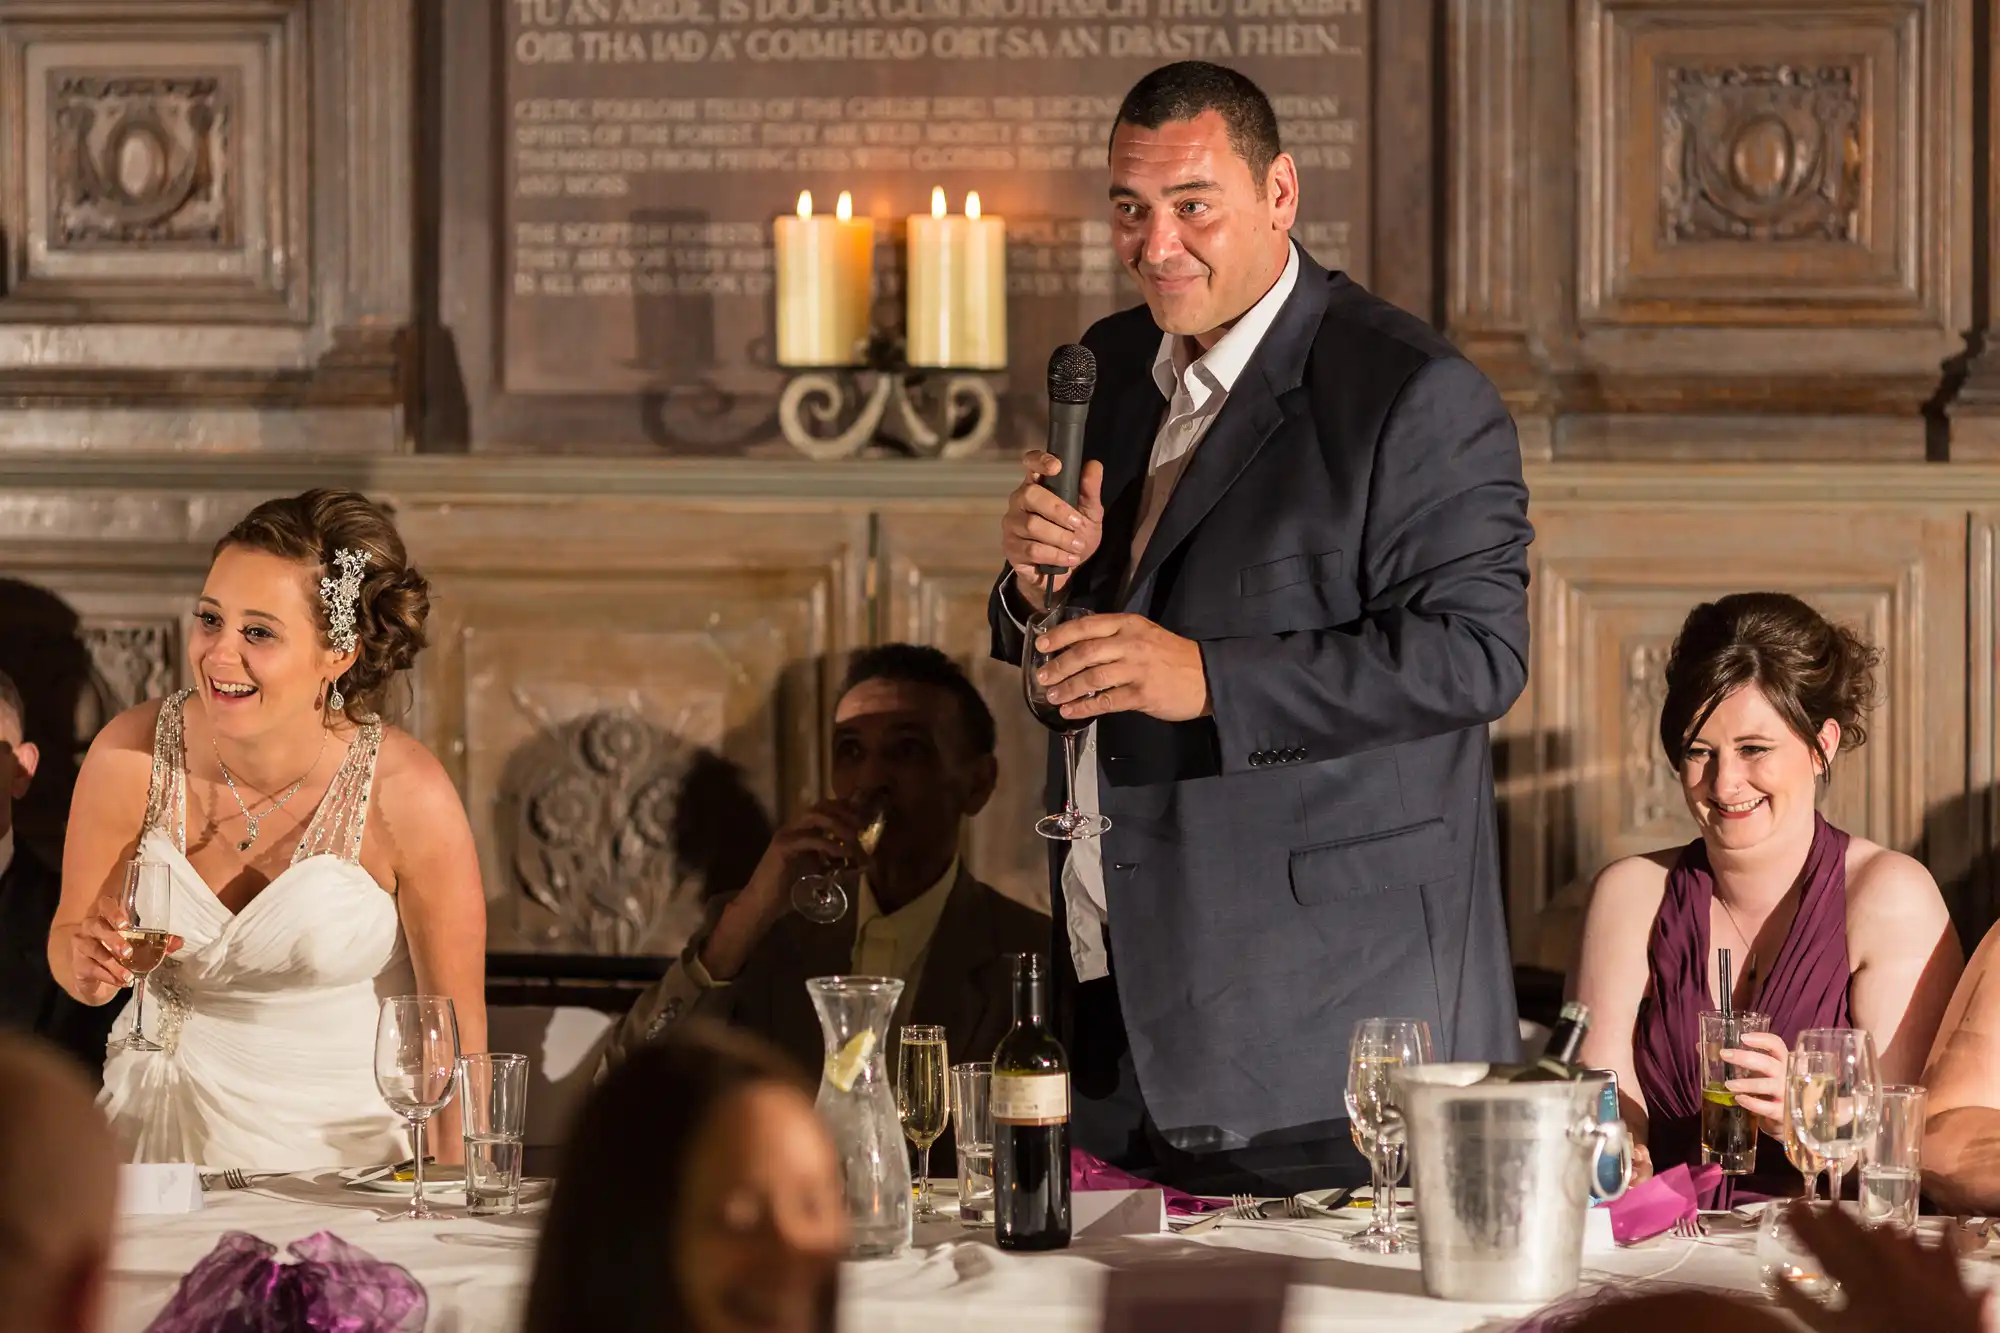 Man giving a speech at a wedding reception, holding a microphone, with a bride and other guests seated and smiling around a dinner table lit by candlelight.